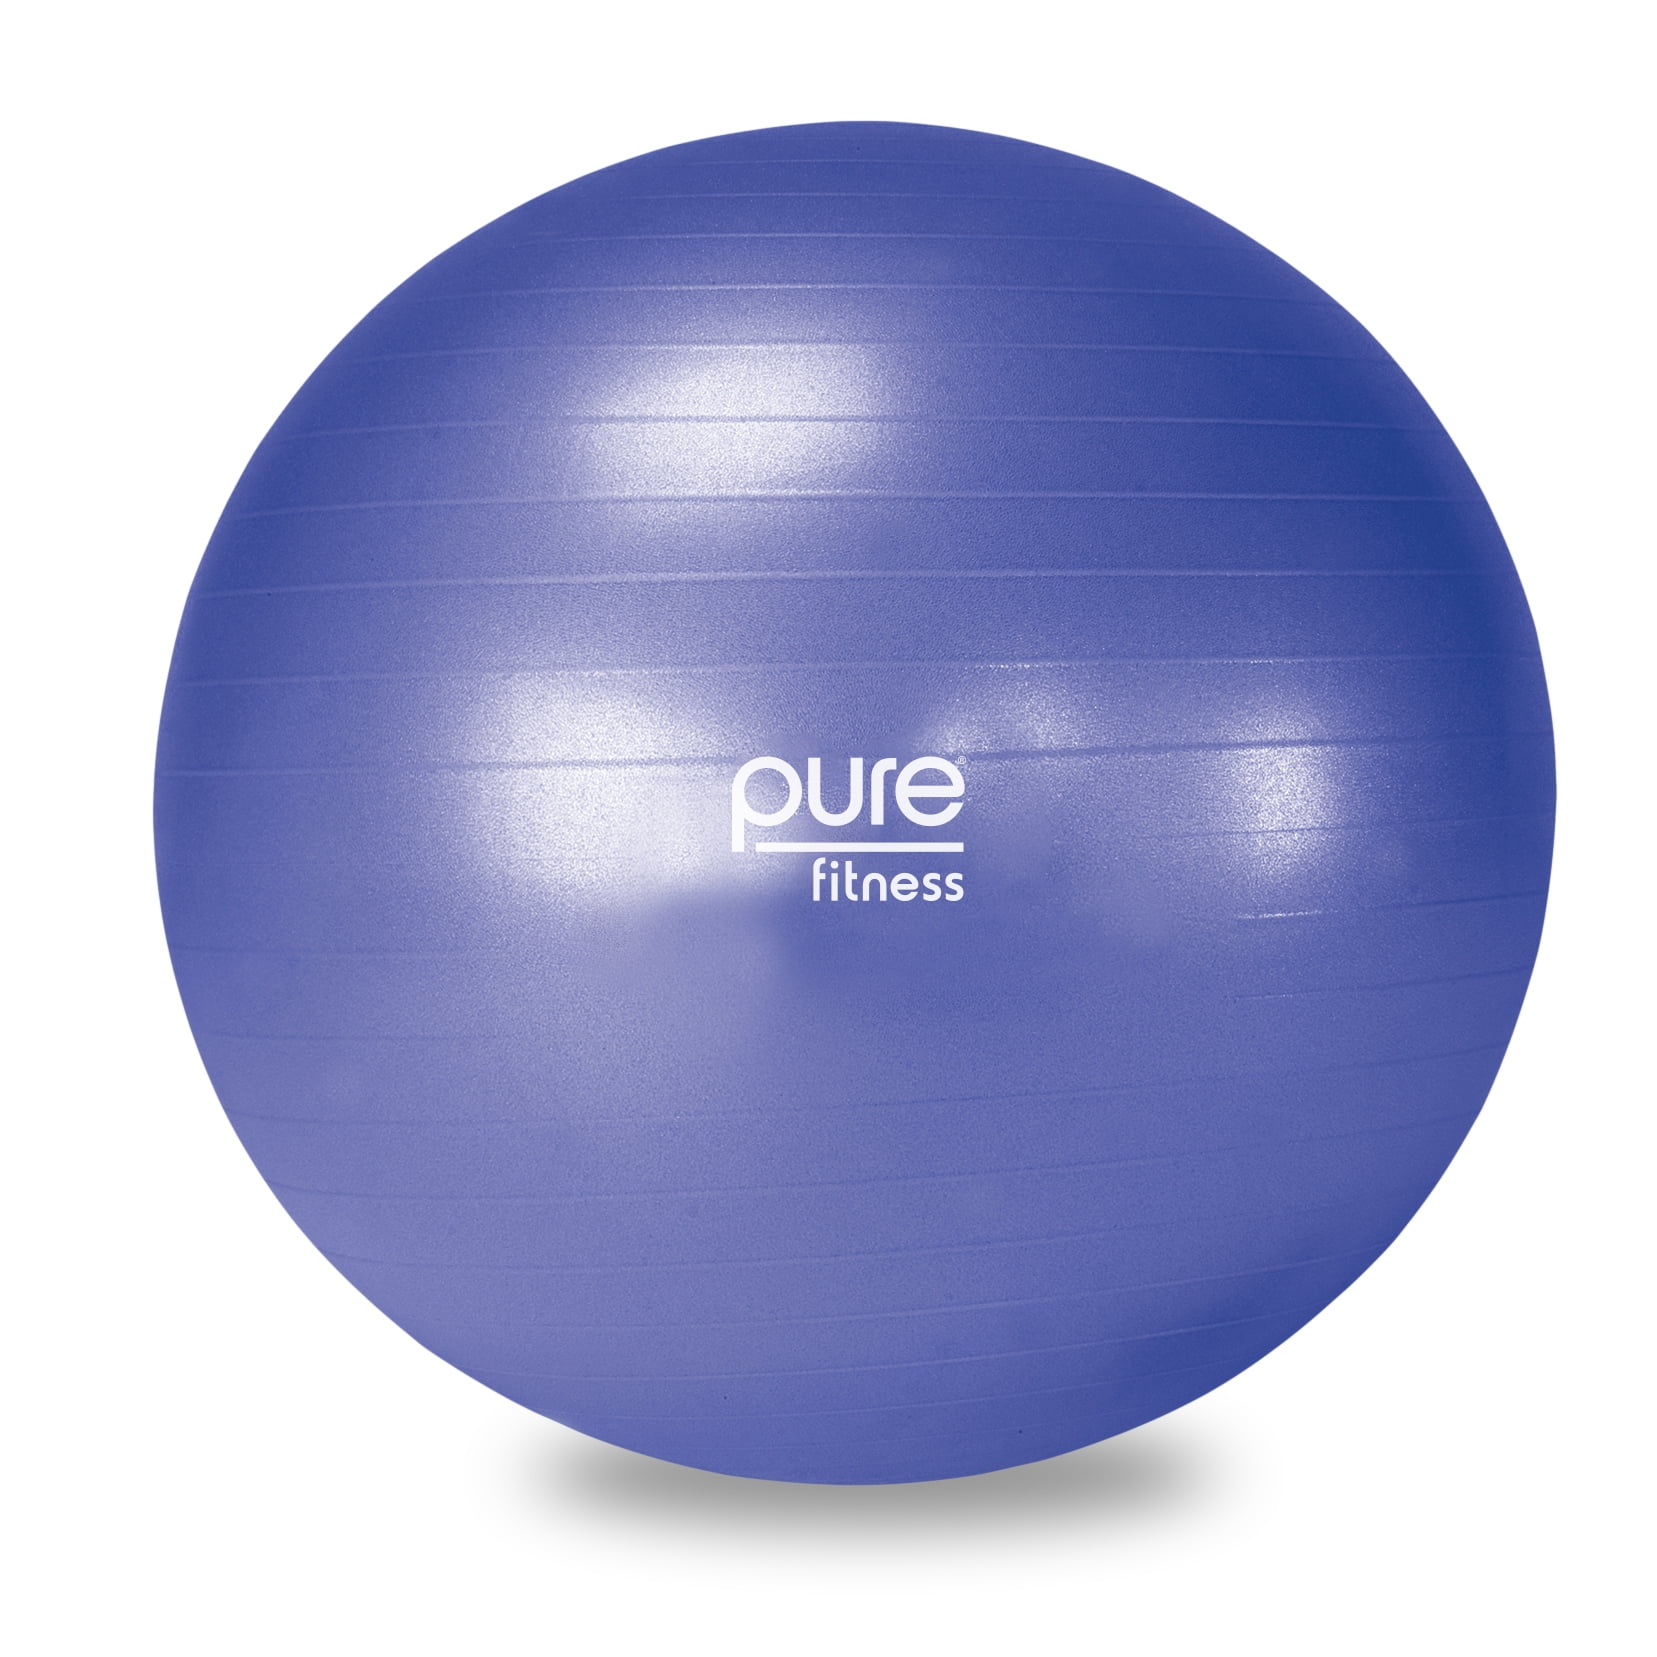 Yoga Pilates Ball with Pump Sports Exercise Fitness Gear Portable Blue Pink 